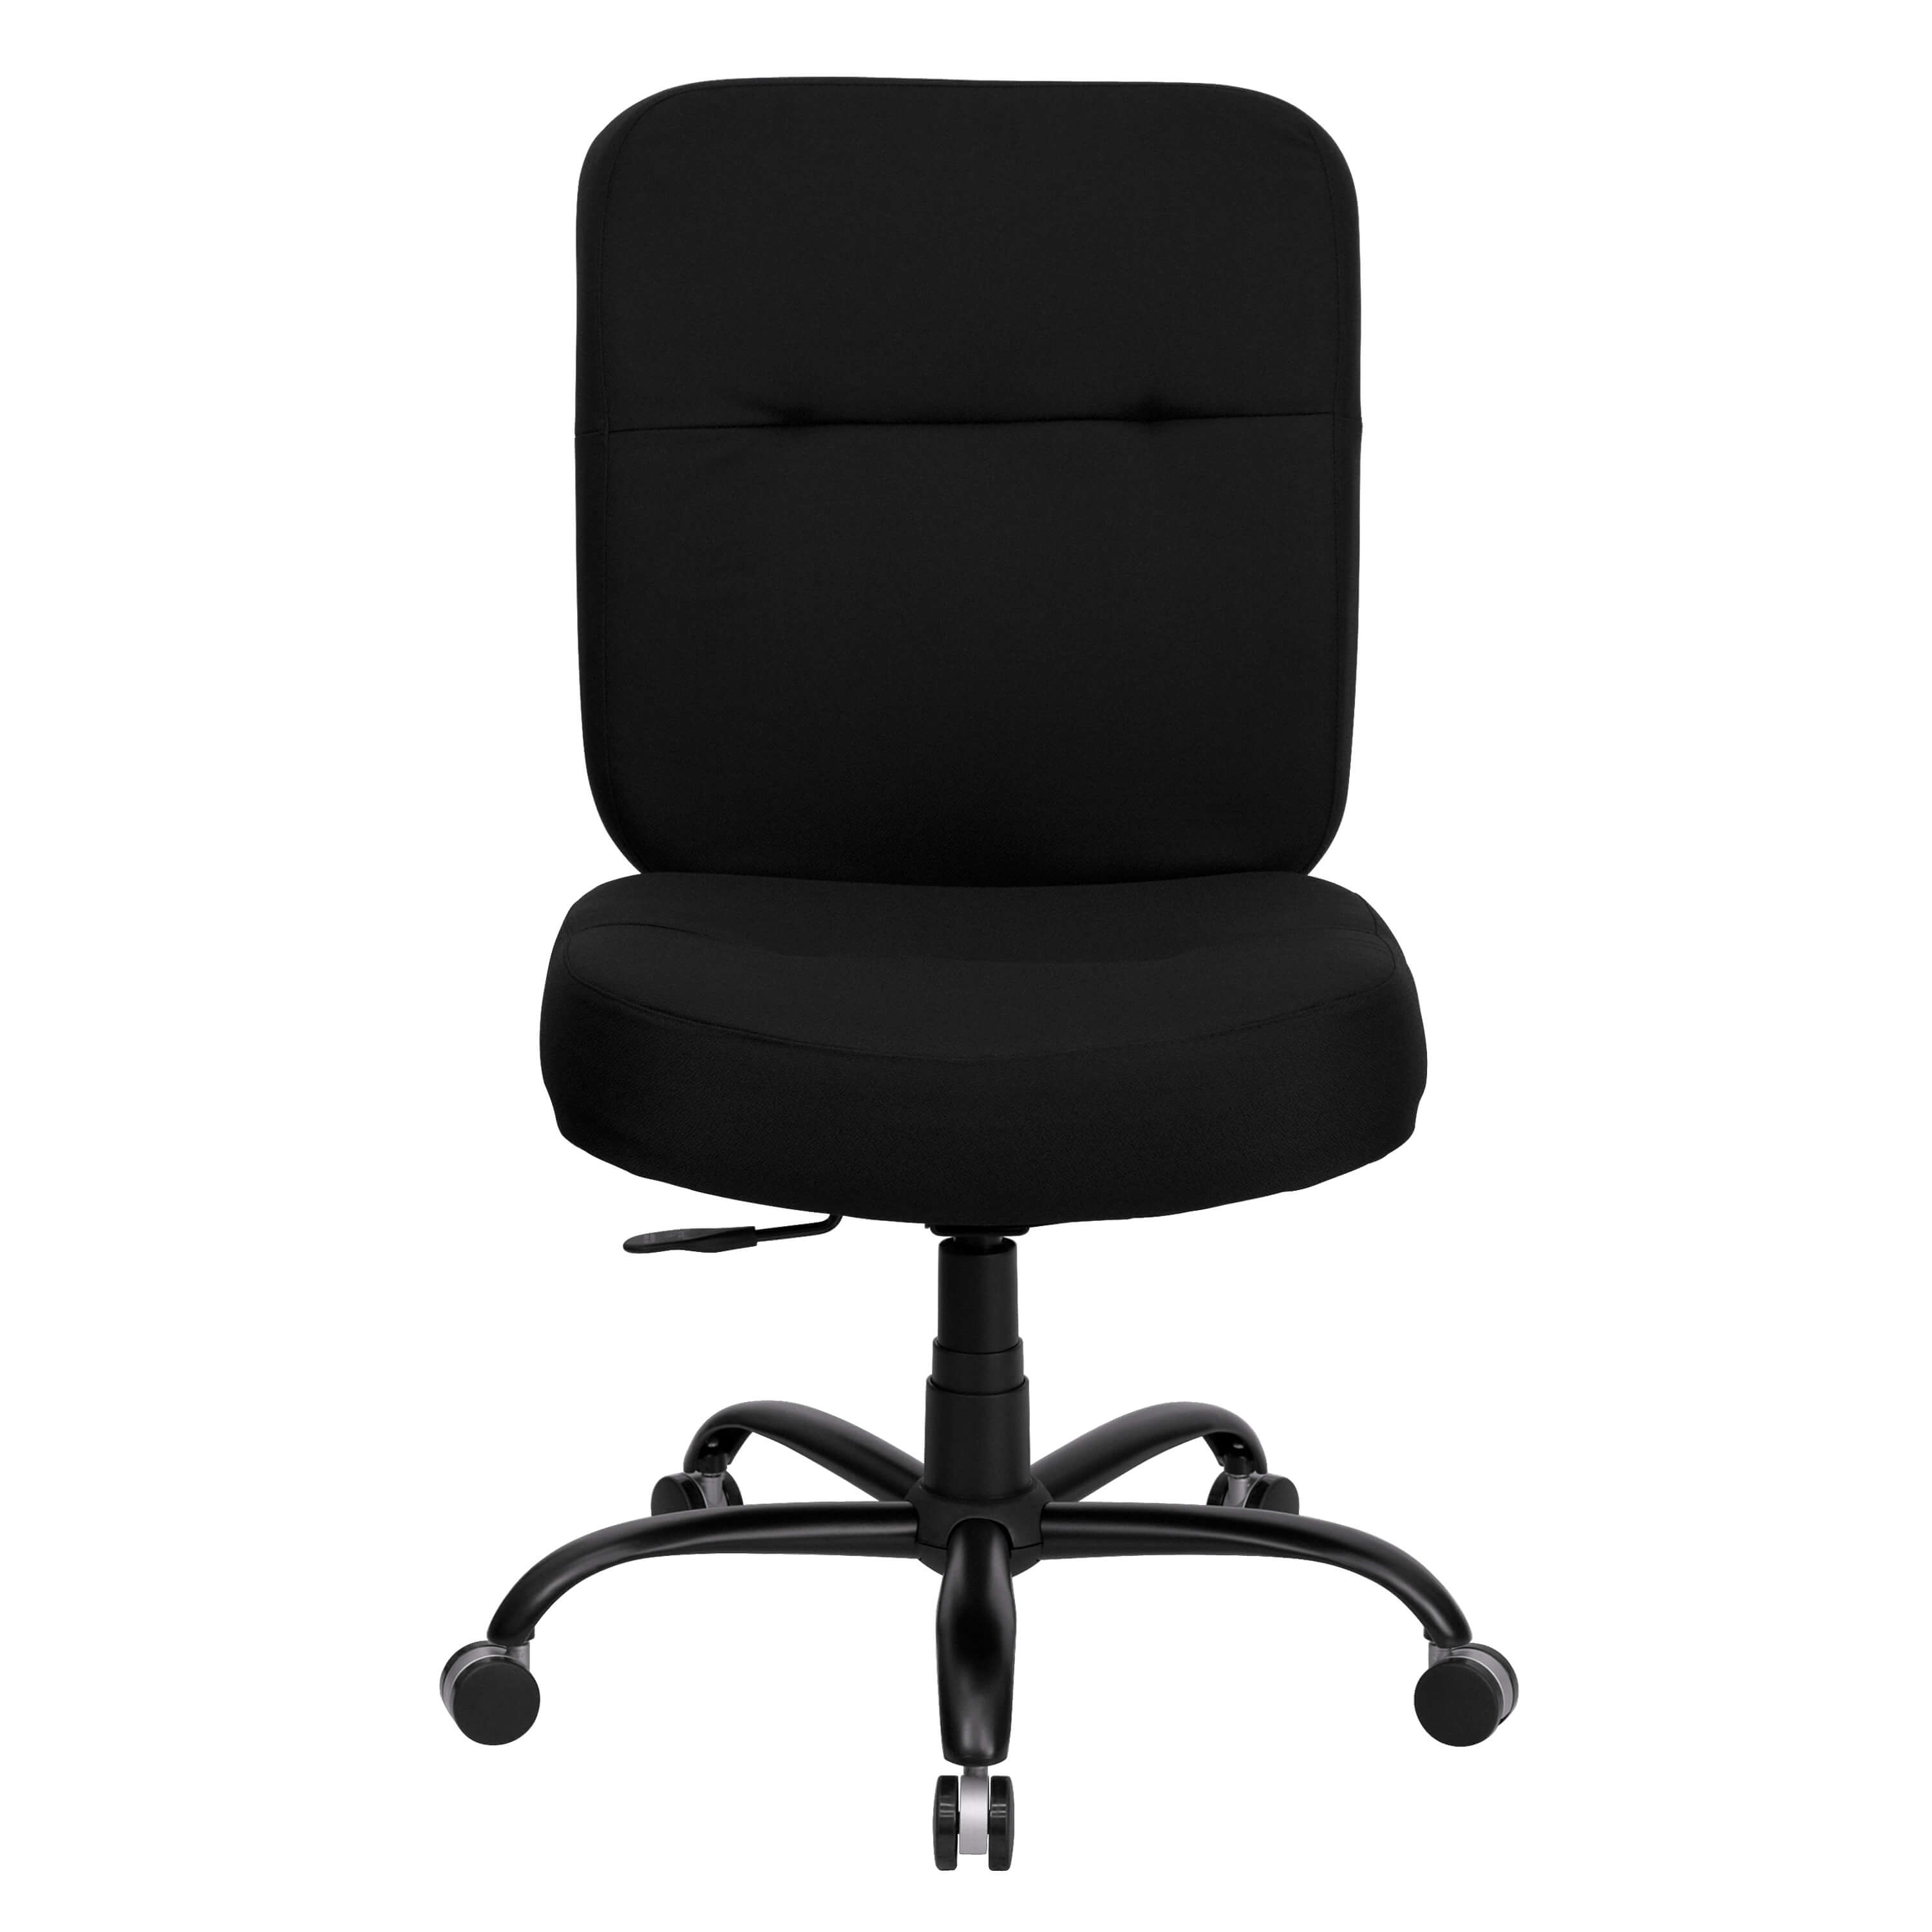 High weight capacity office chair front view